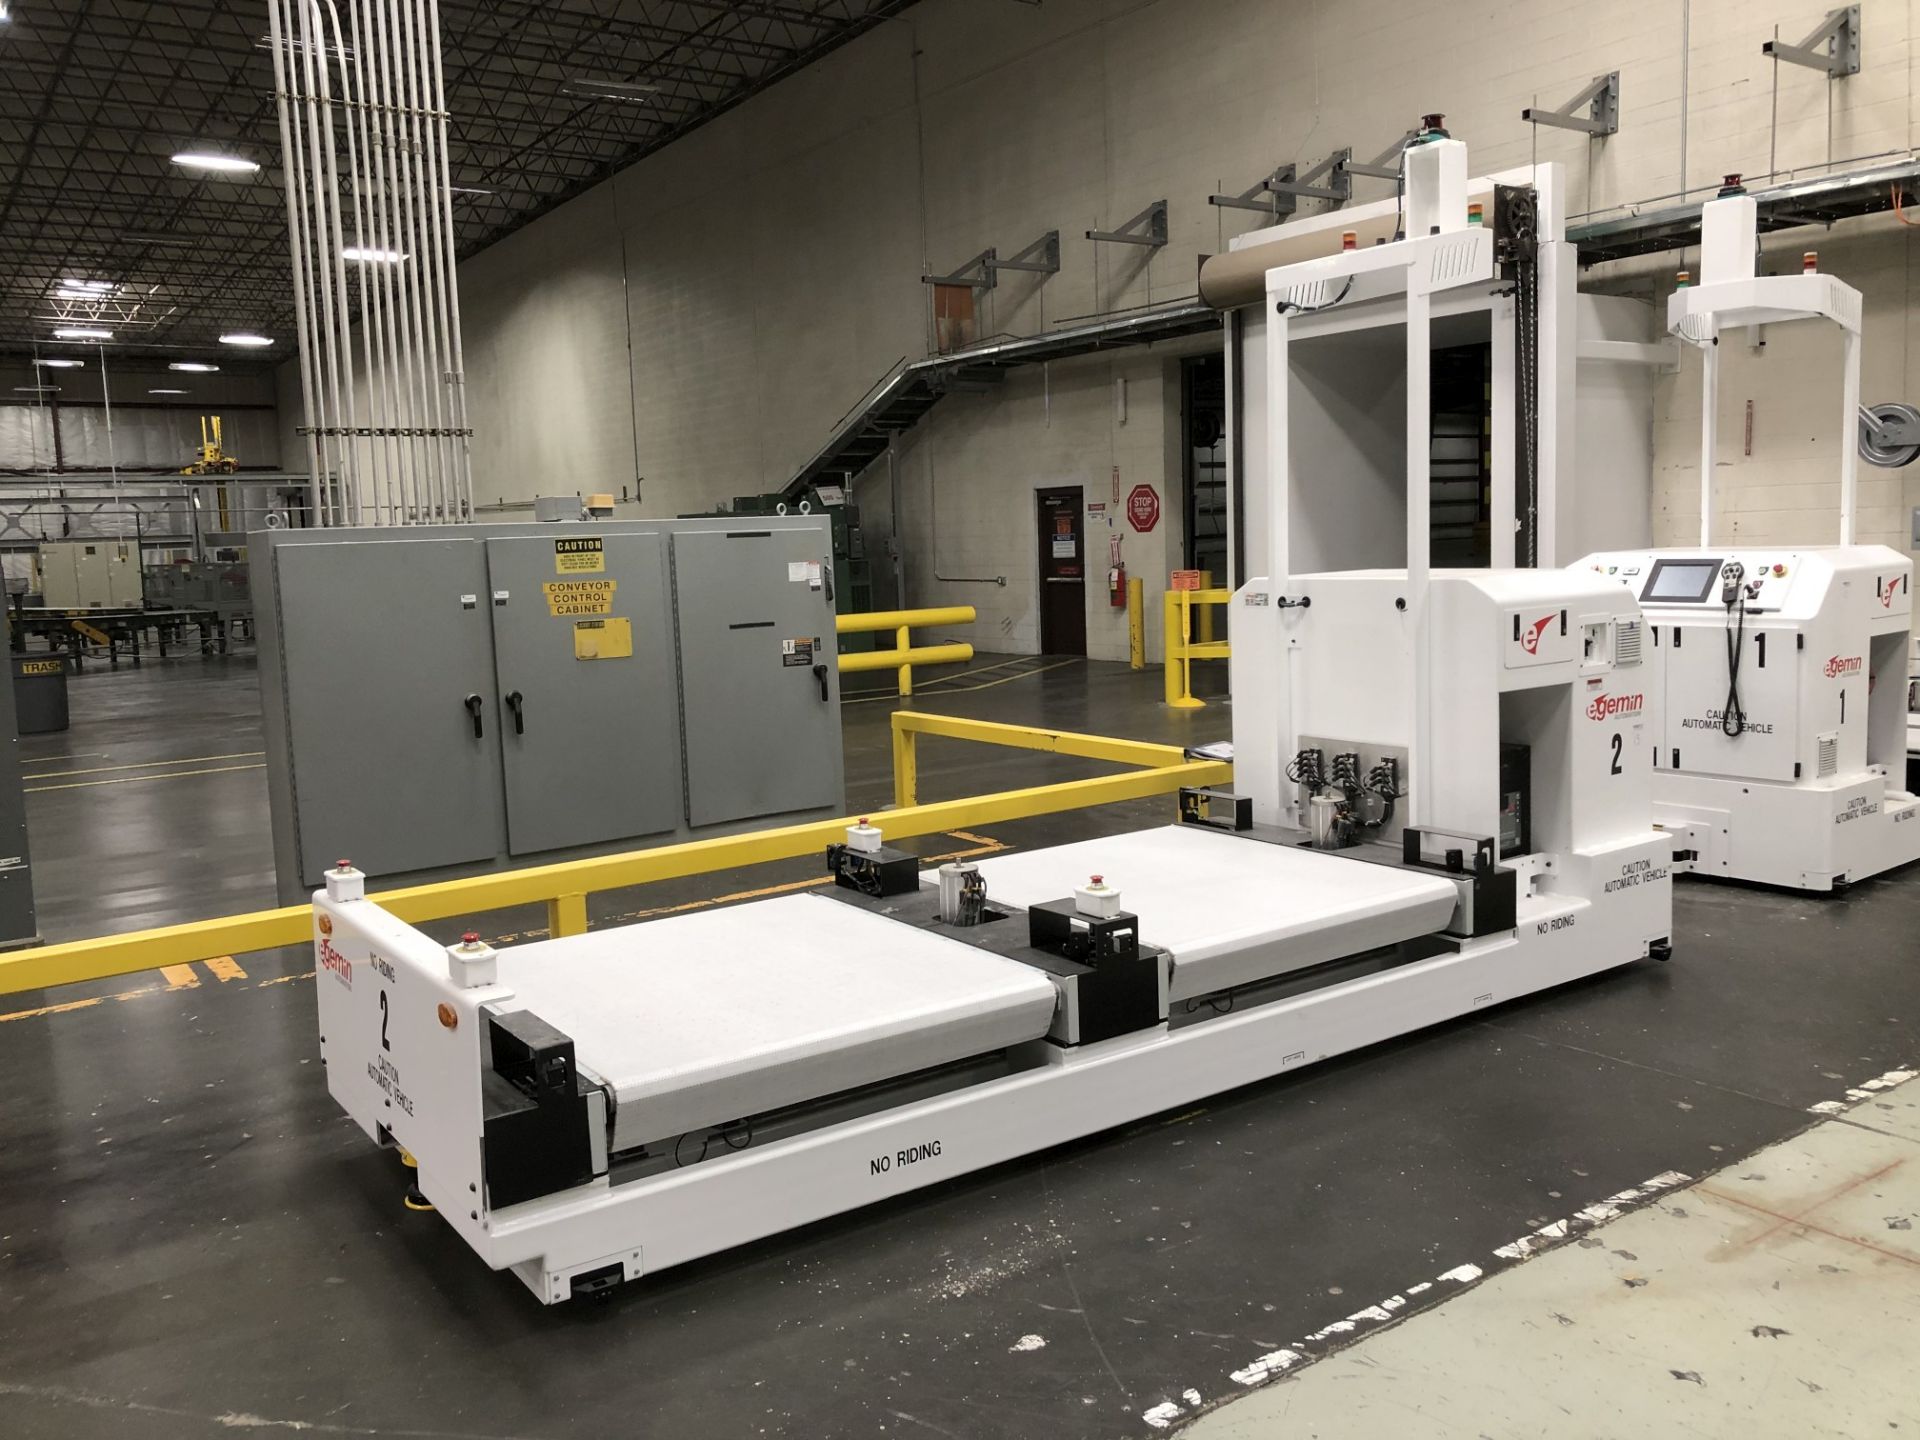 2017 Egemin Automation Unit Load Deck Automated Guided Vehicle (AGV), Model LTV 0515 L, 300 FPM - Image 2 of 11